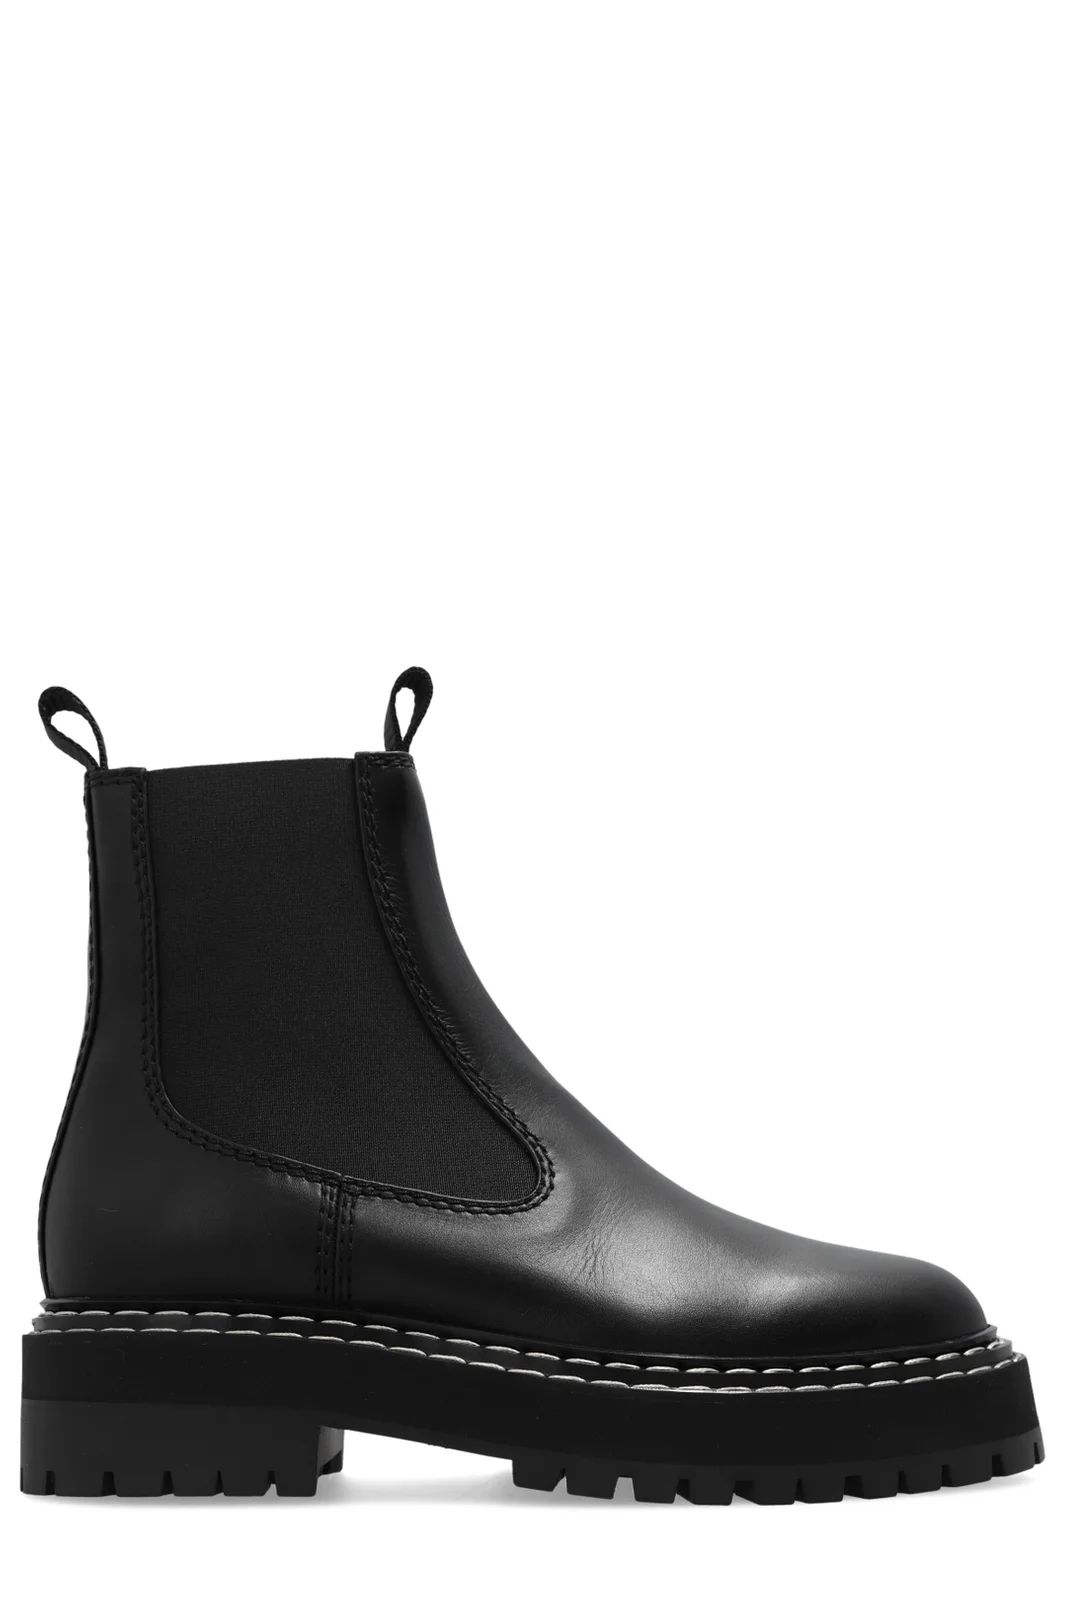 Proenza Schouler Round Toe Chelsea Ankle Boots | Cettire Global